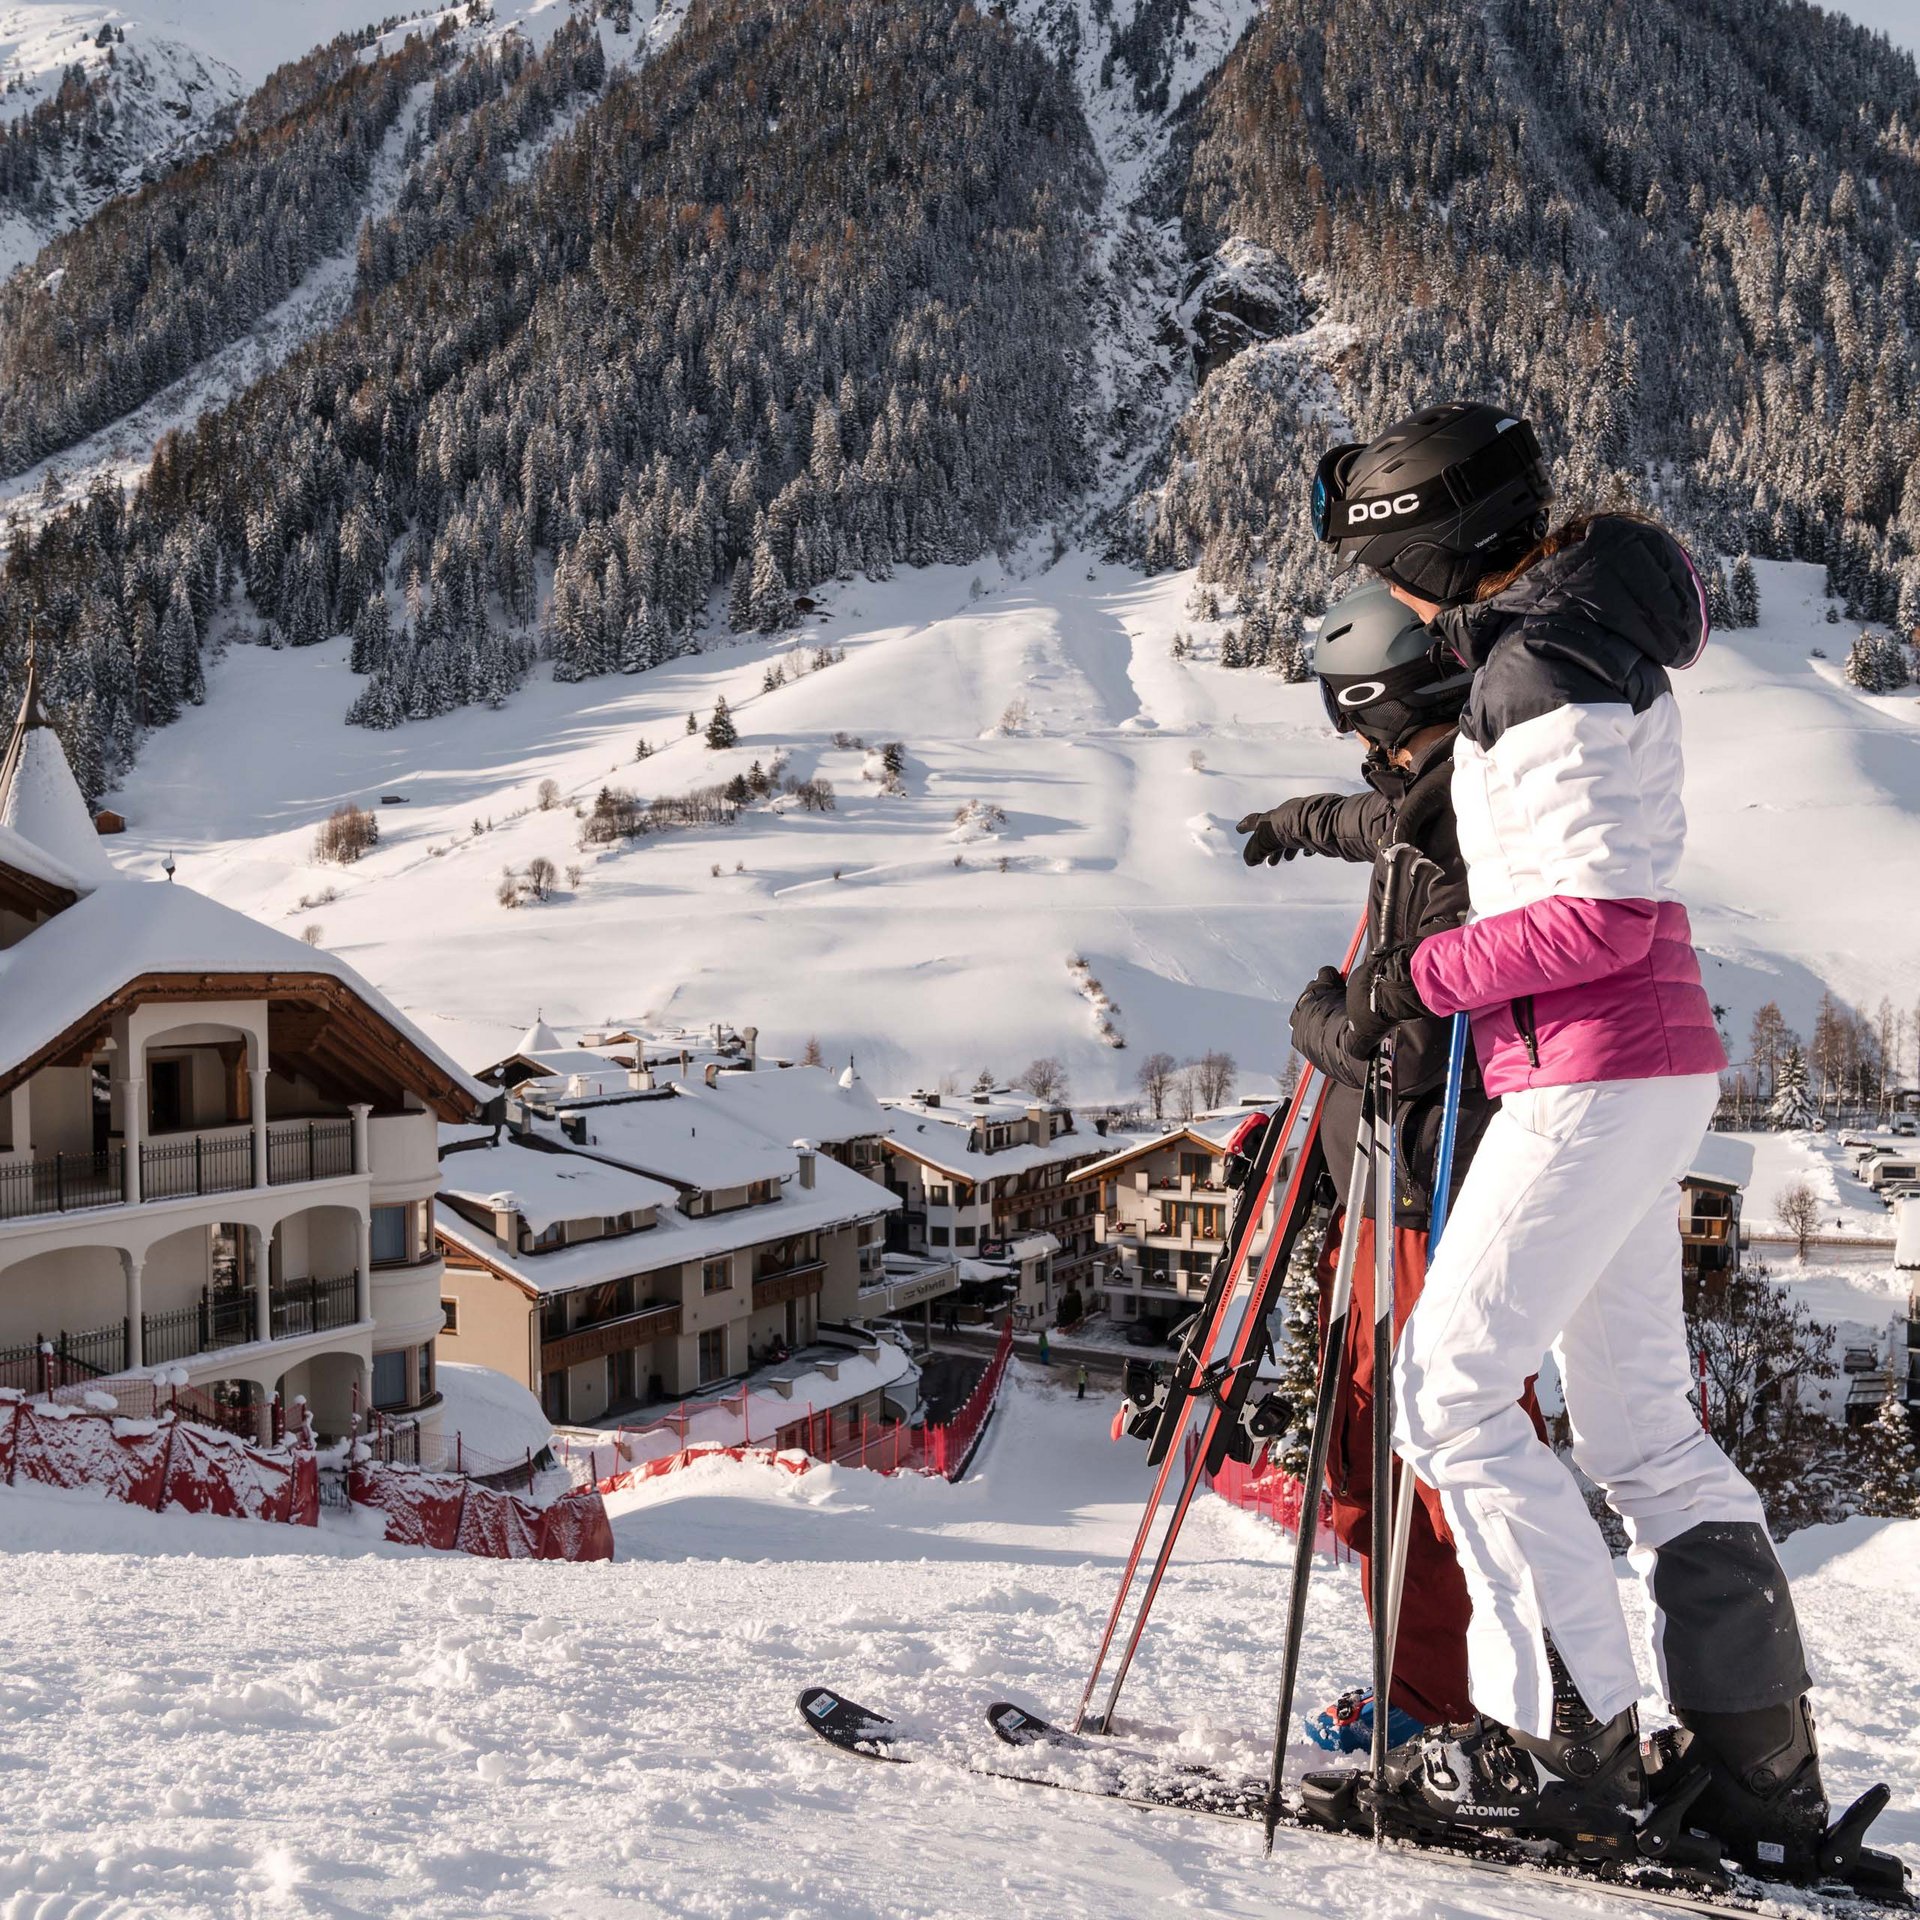 Tailor-made holidays at the boutique hotel in Ischgl